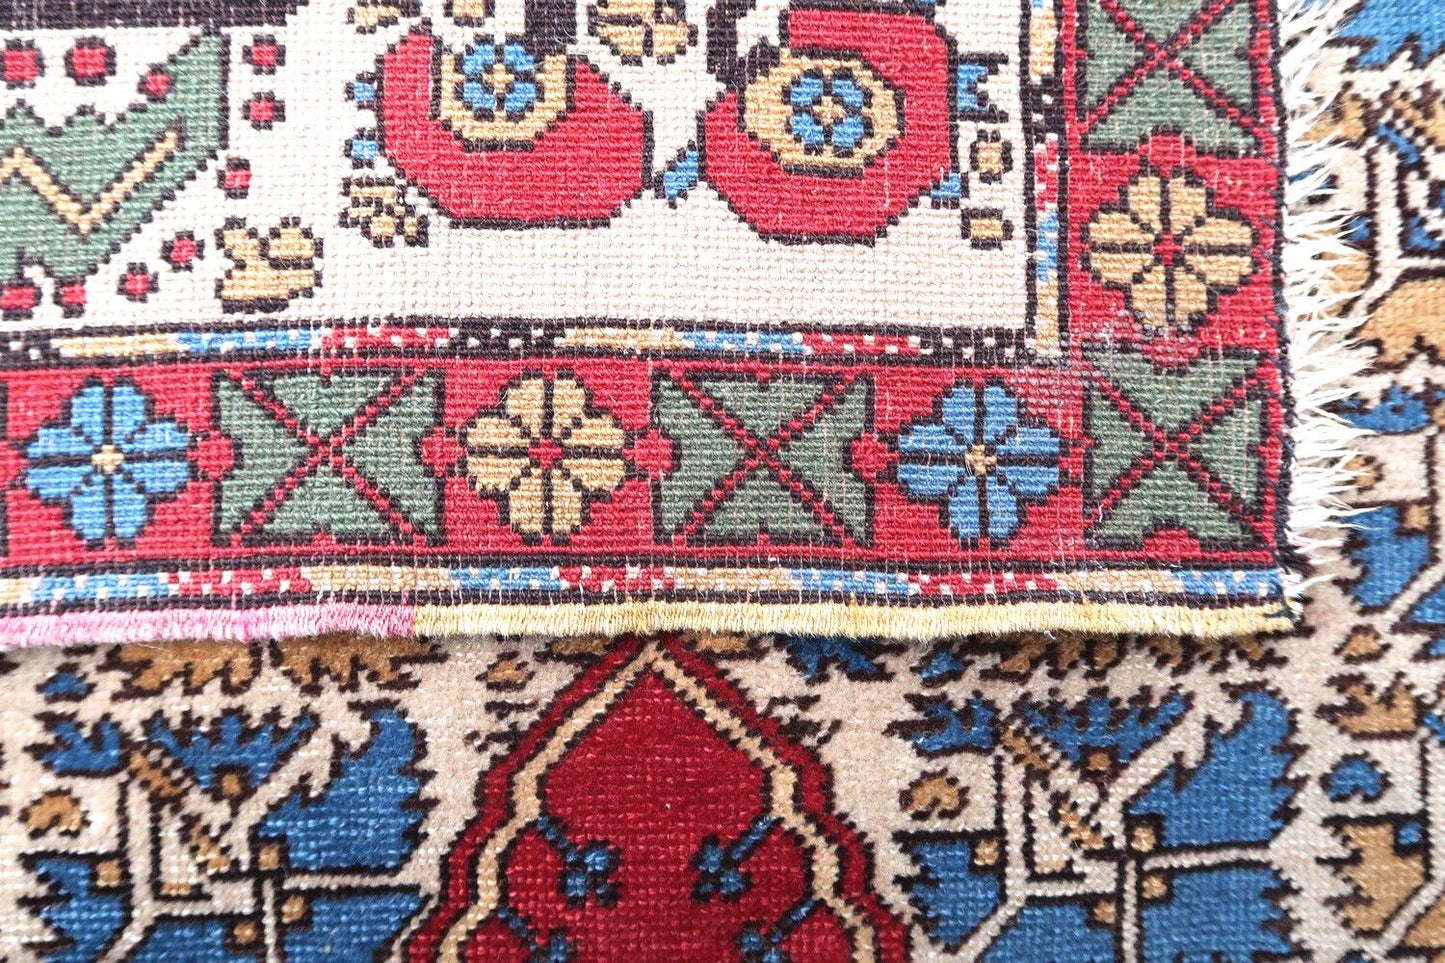 Handmade antique Turkish Transylvania prayer rug in bright natural dyes. The rug is from the end of 19th century in original good condition.